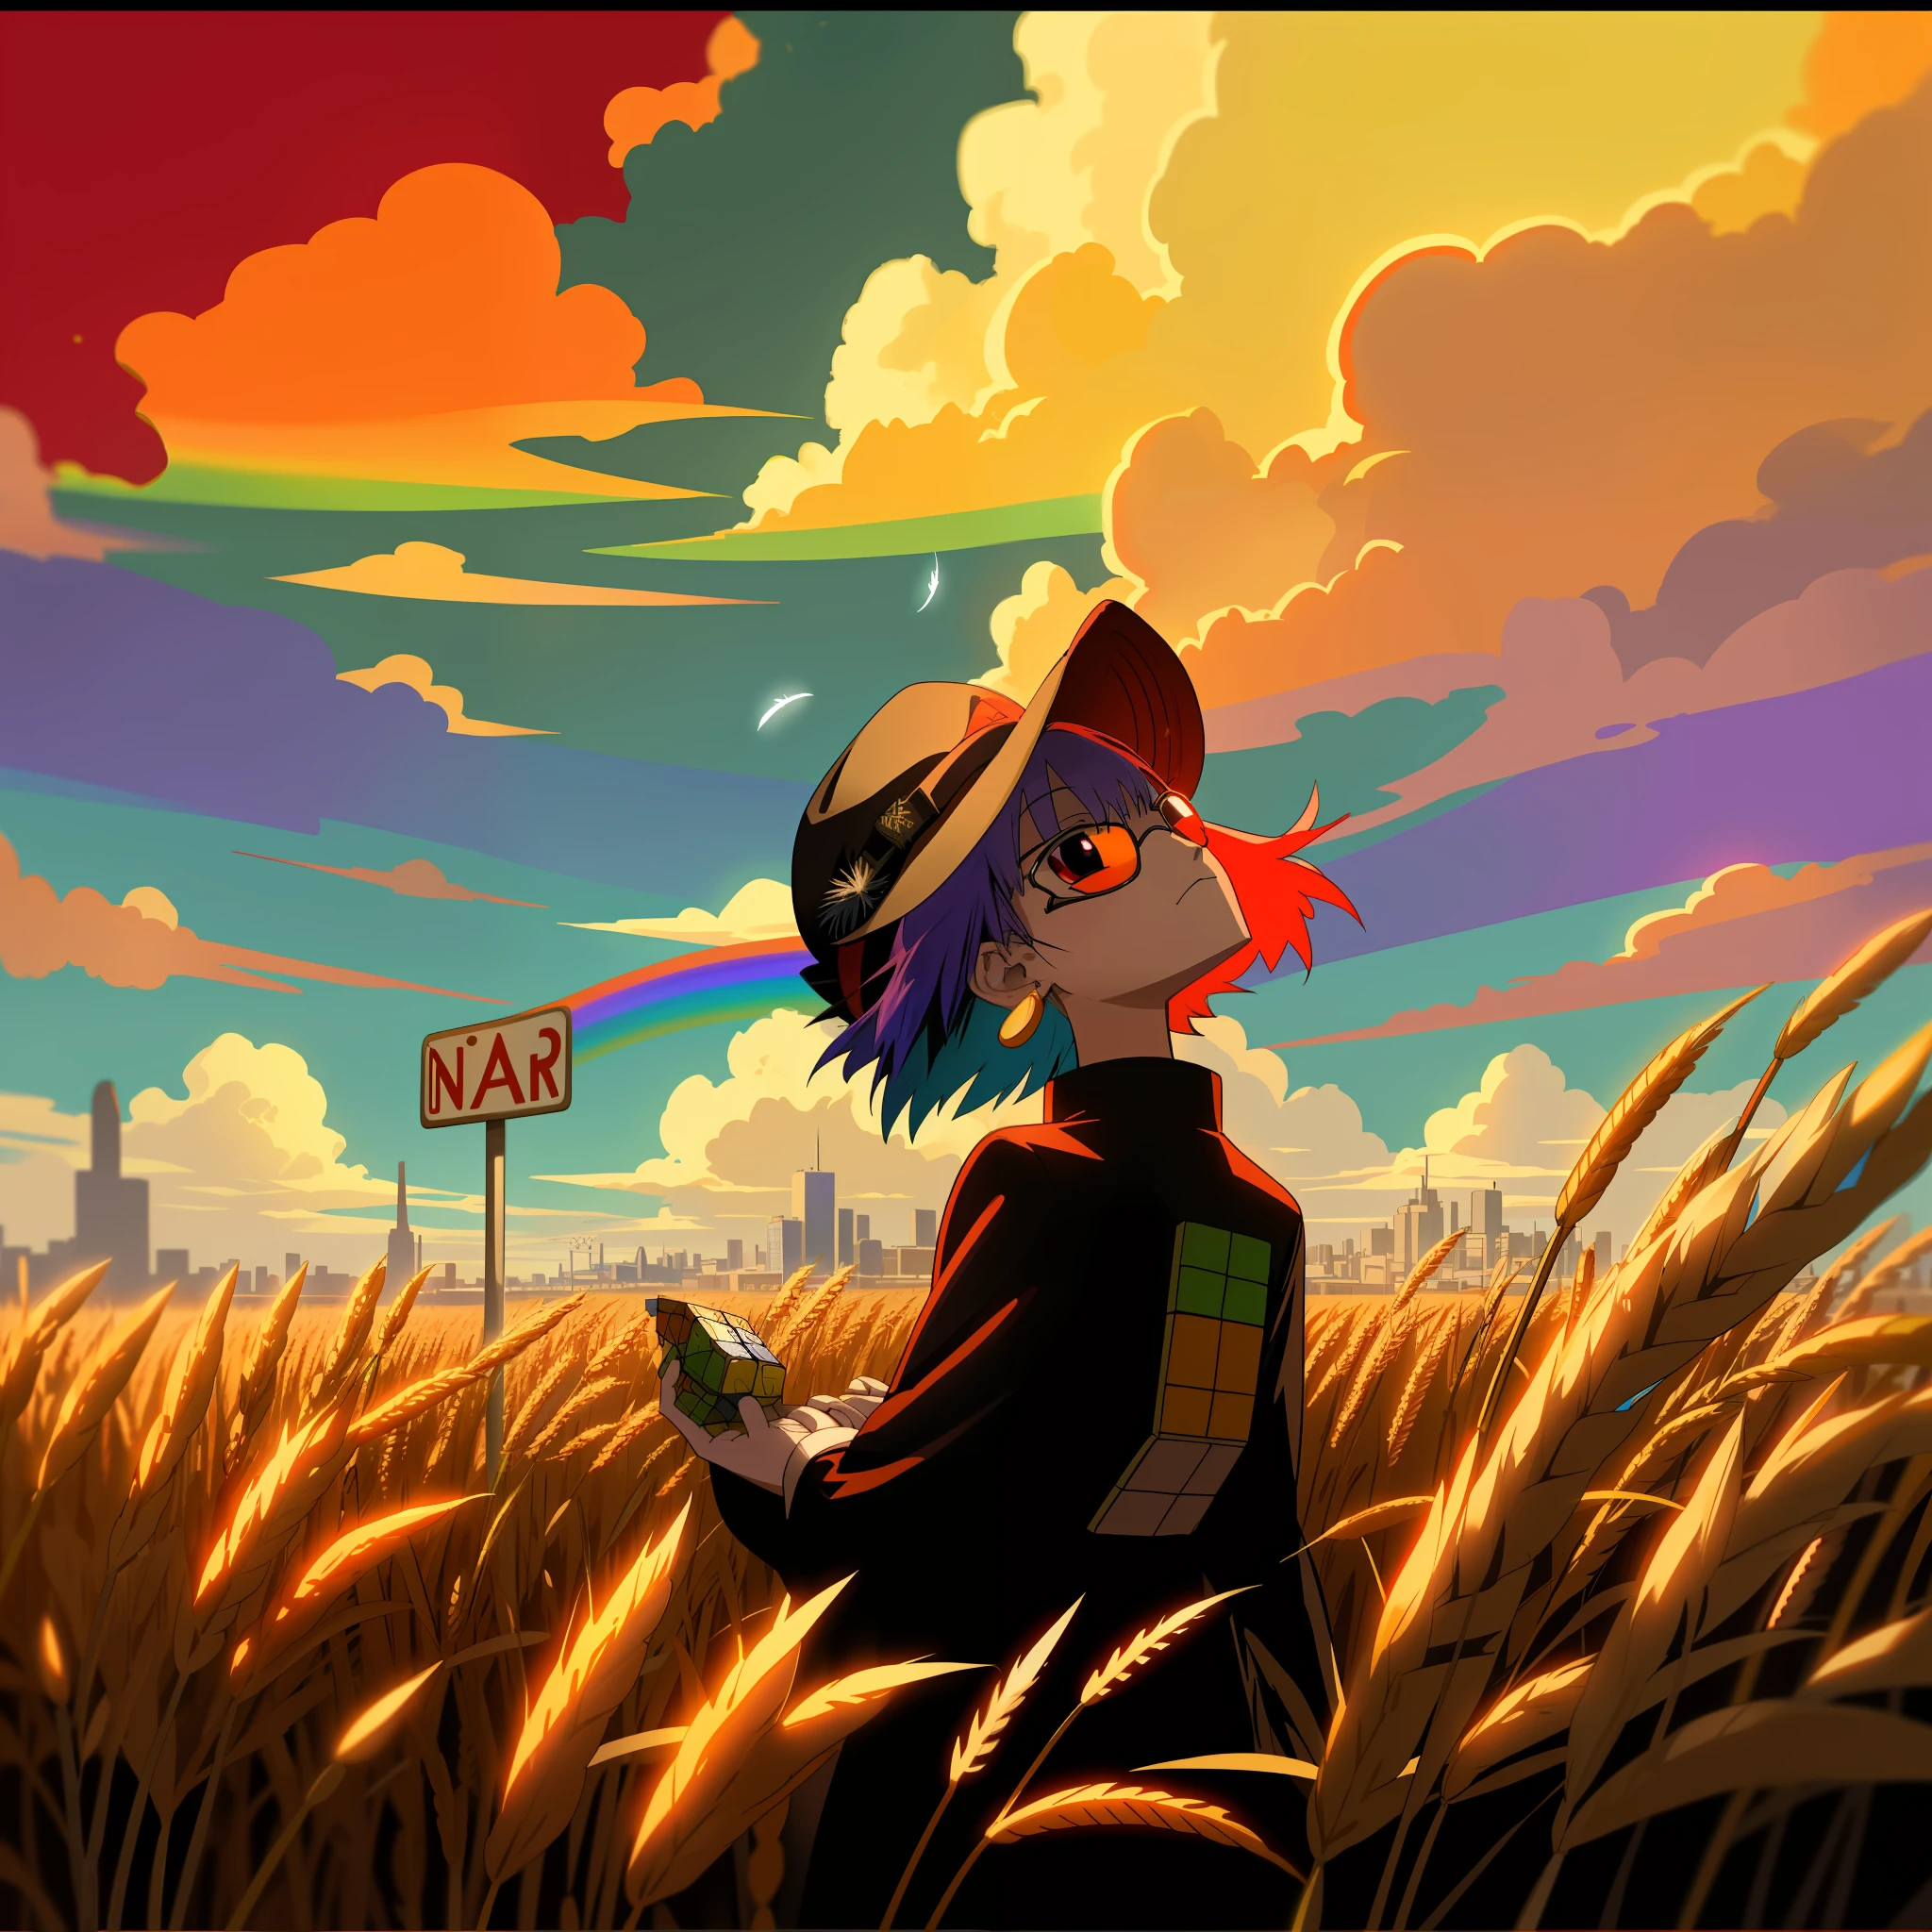 Anime style, A city in Dalí, Clouds, rainbow hair, Feather earring, briefs, Rubik's cube cap with 2 colors: white and black, Hands Behind Your Back, sunglasses on the head with red lenses, hat, Wheat field in the foreground, road sign, Looking Up, Colors of the sunset, detailing, surround light, Hideaki Anno's style